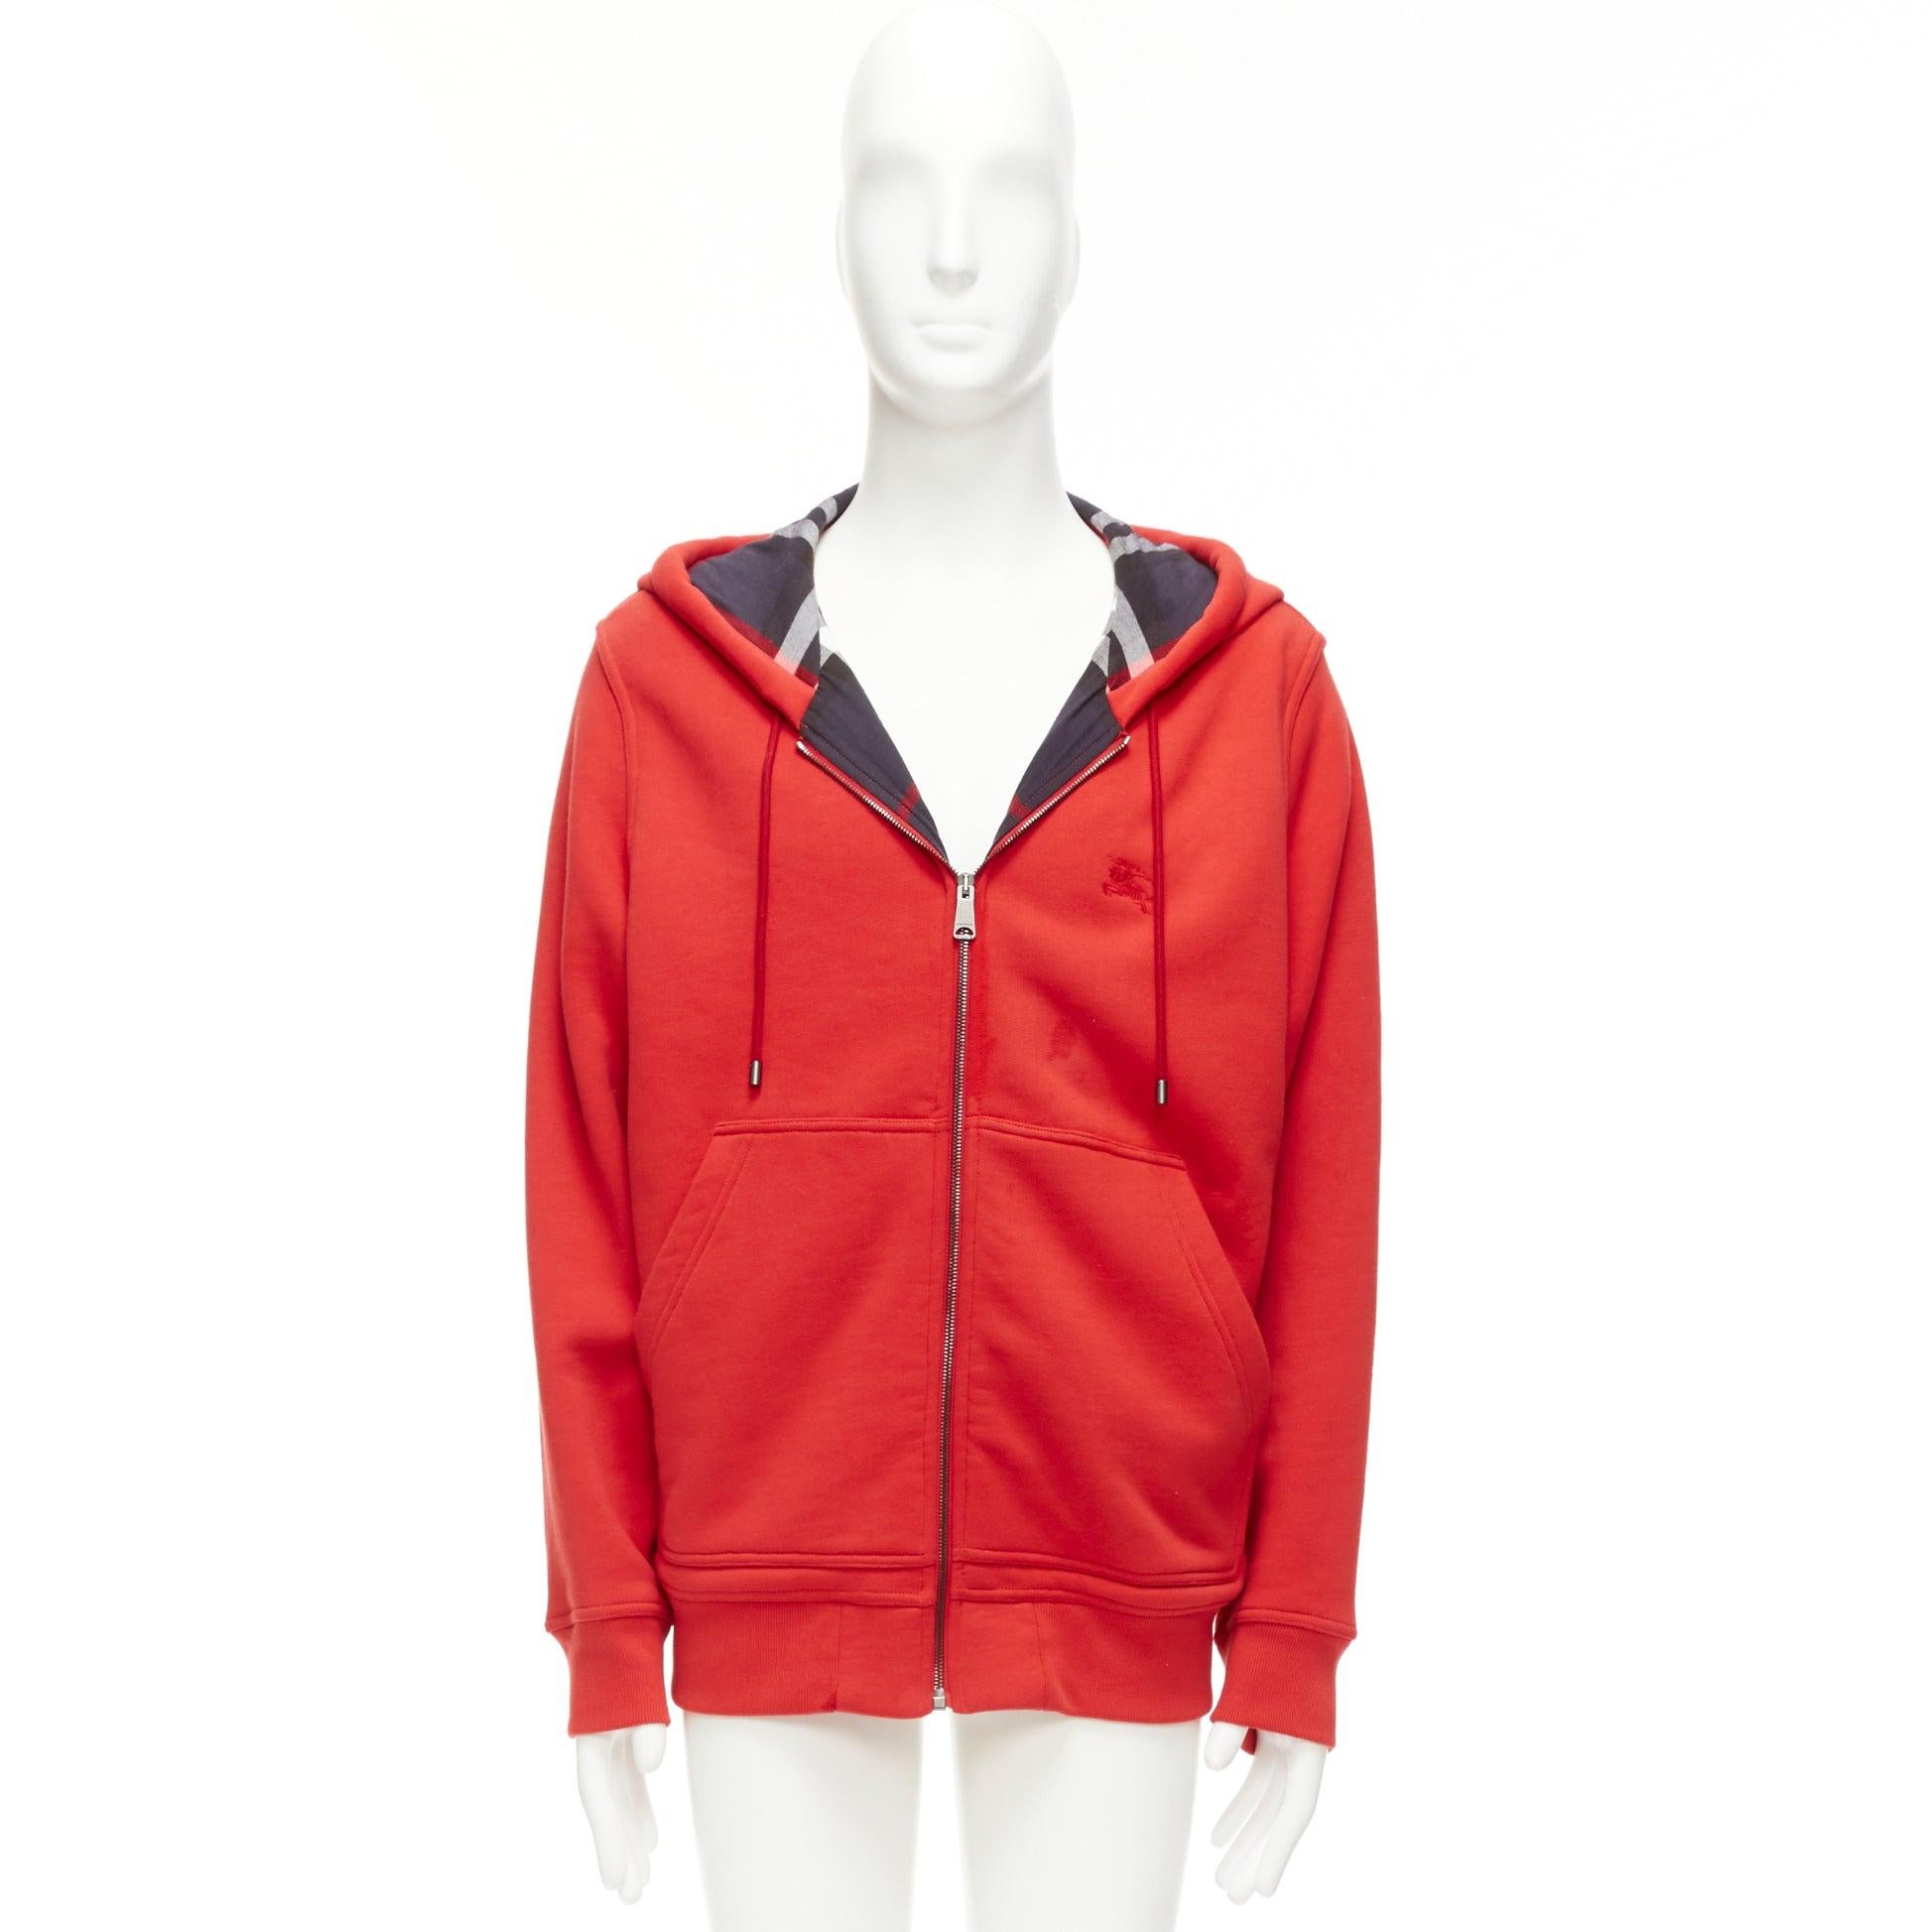 BURBERRY red cotton blend house check lined logo oversized hoodie XS
Reference: YIKK/A00026
Brand: Burberry
Material: Cotton, Blend
Color: Red, Multicolour
Pattern: Checkered
Closure: Zip
Lining: Multicolour Fabric
Made in: